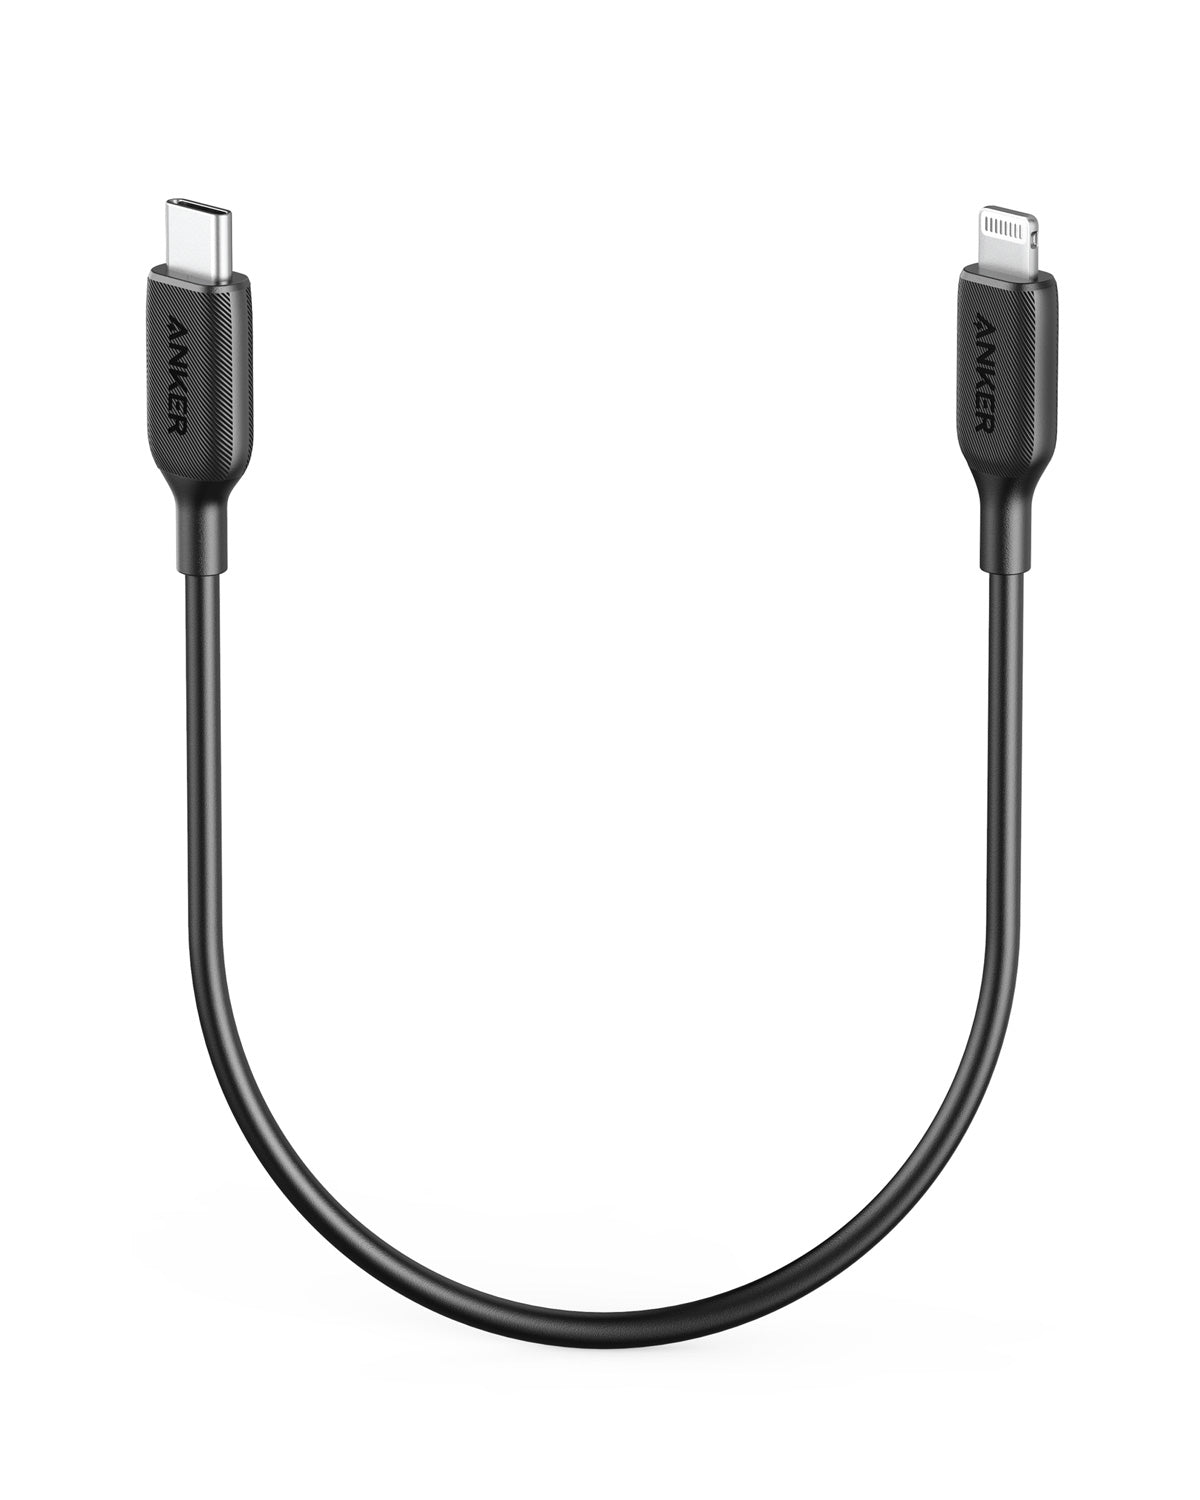 Anker 541 USB-C to Lightning Cable (1ft / 3ft / 6ft)